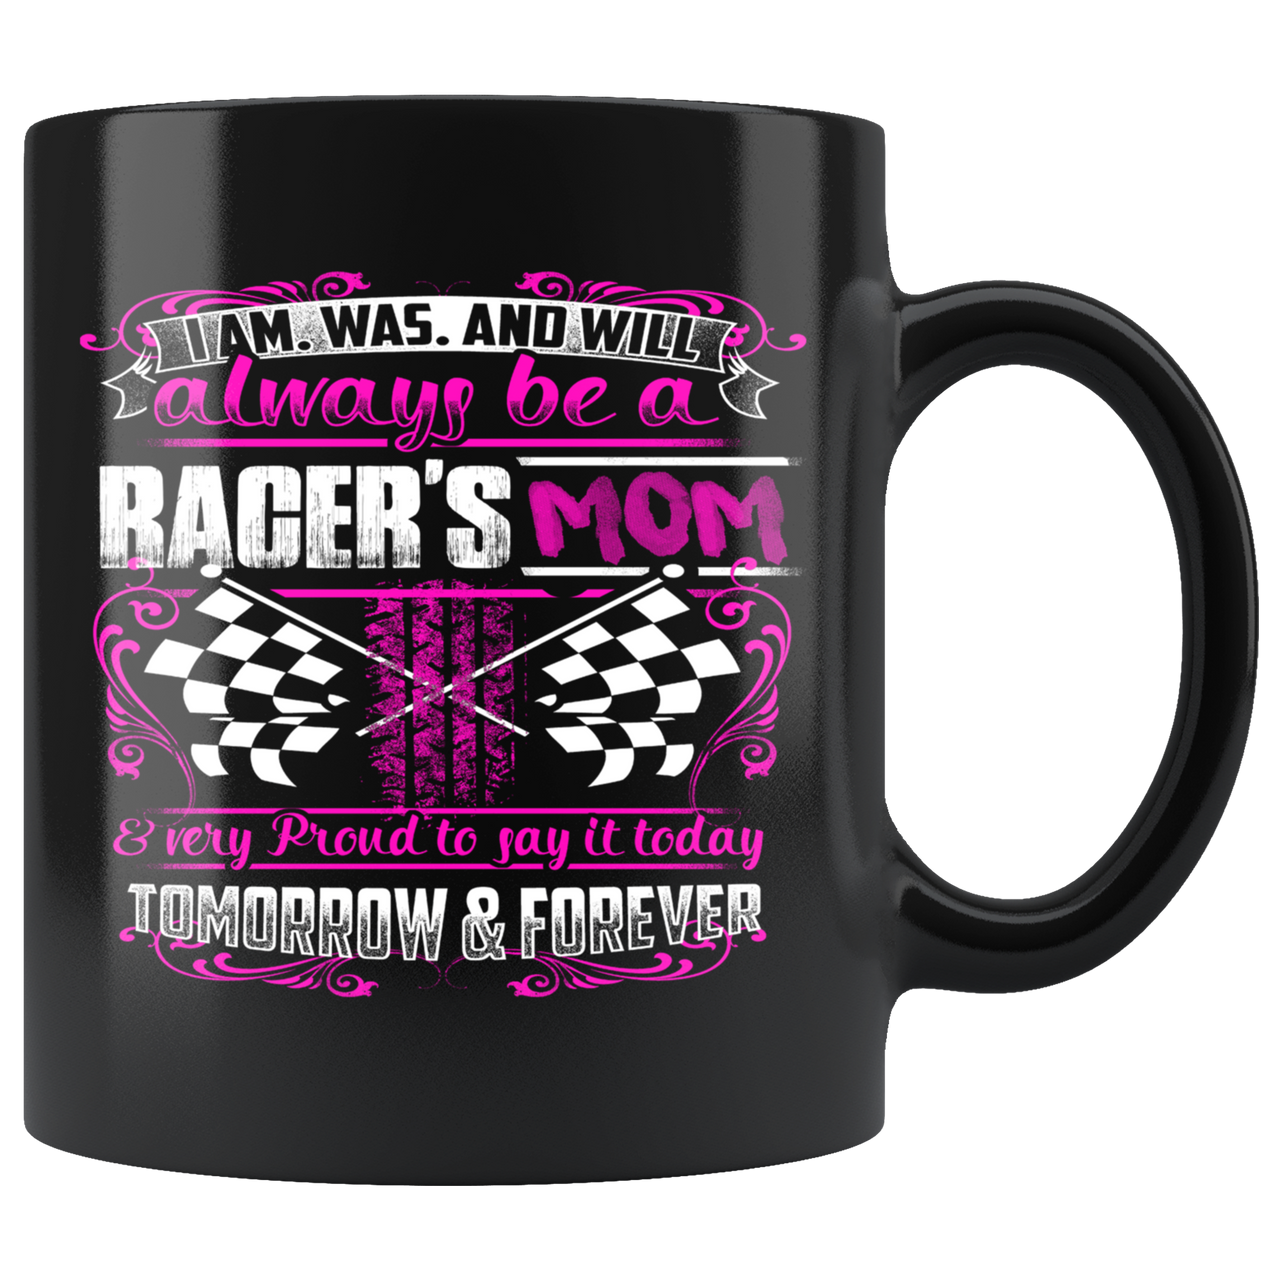 I'm Was And Will Always Be A Racer's Mom Mug!